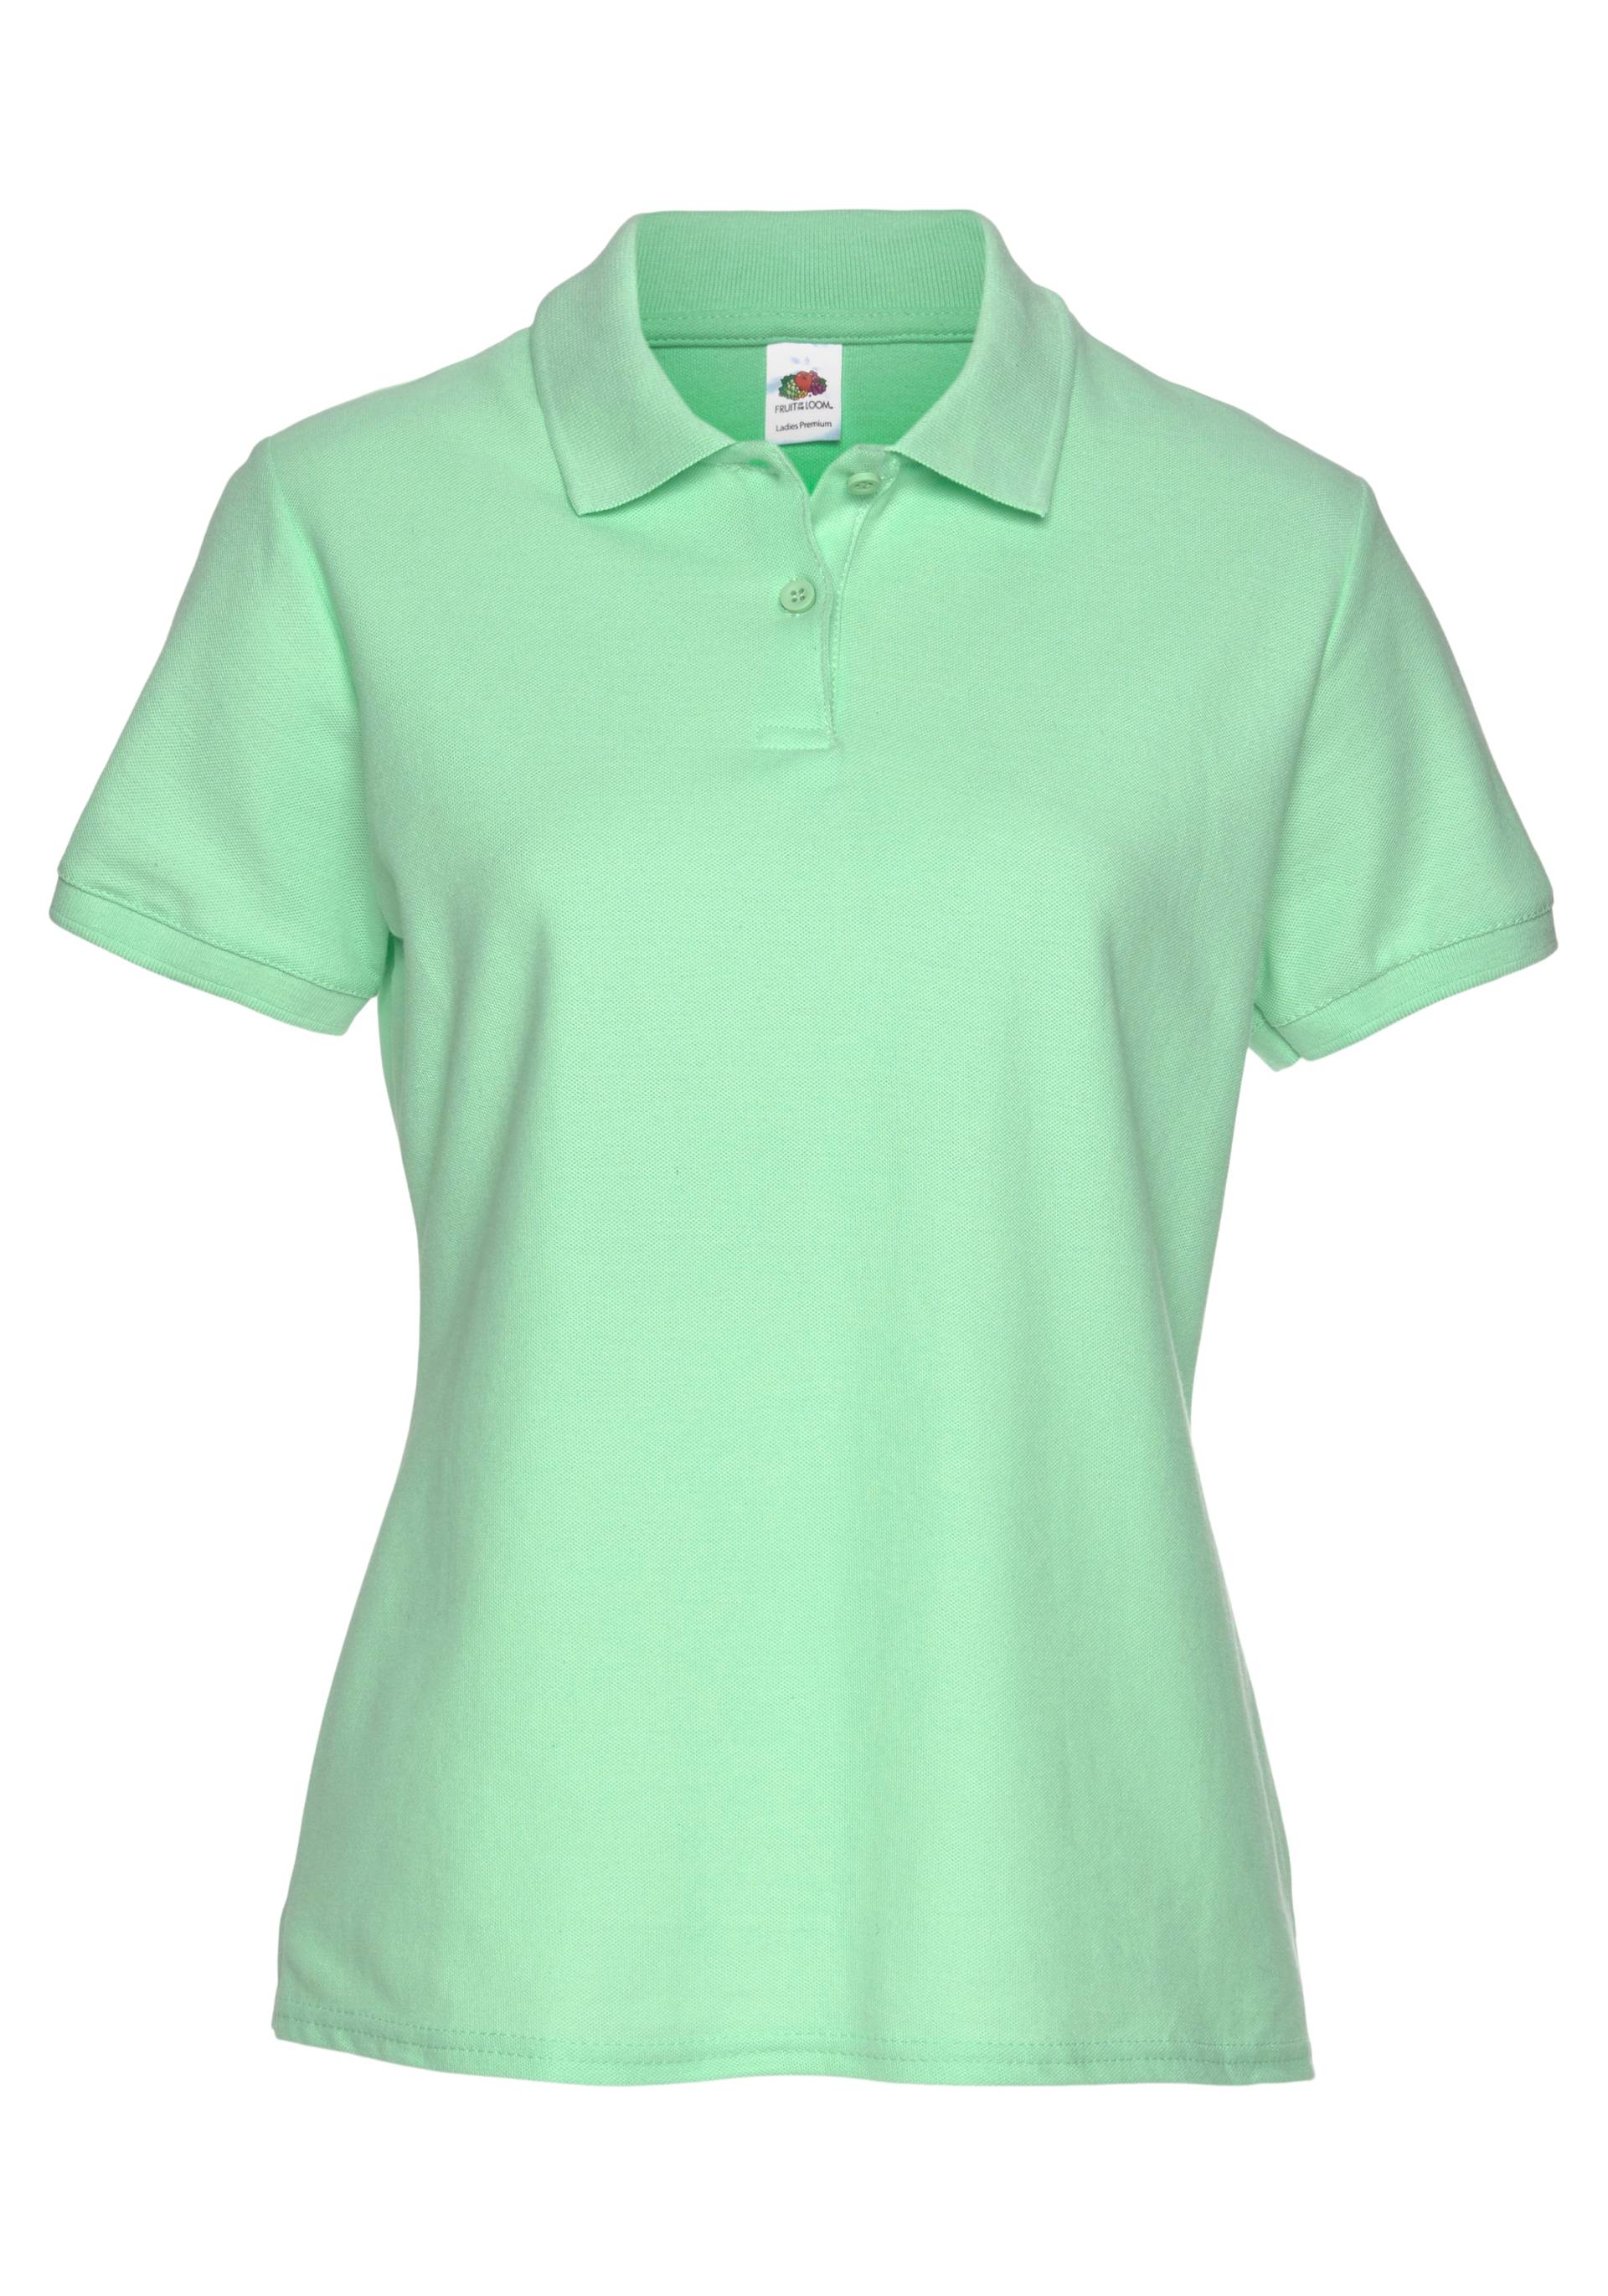 Fruit of the Loom Poloshirt »Lady-Fit Premium Polo« von Fruit Of The Loom